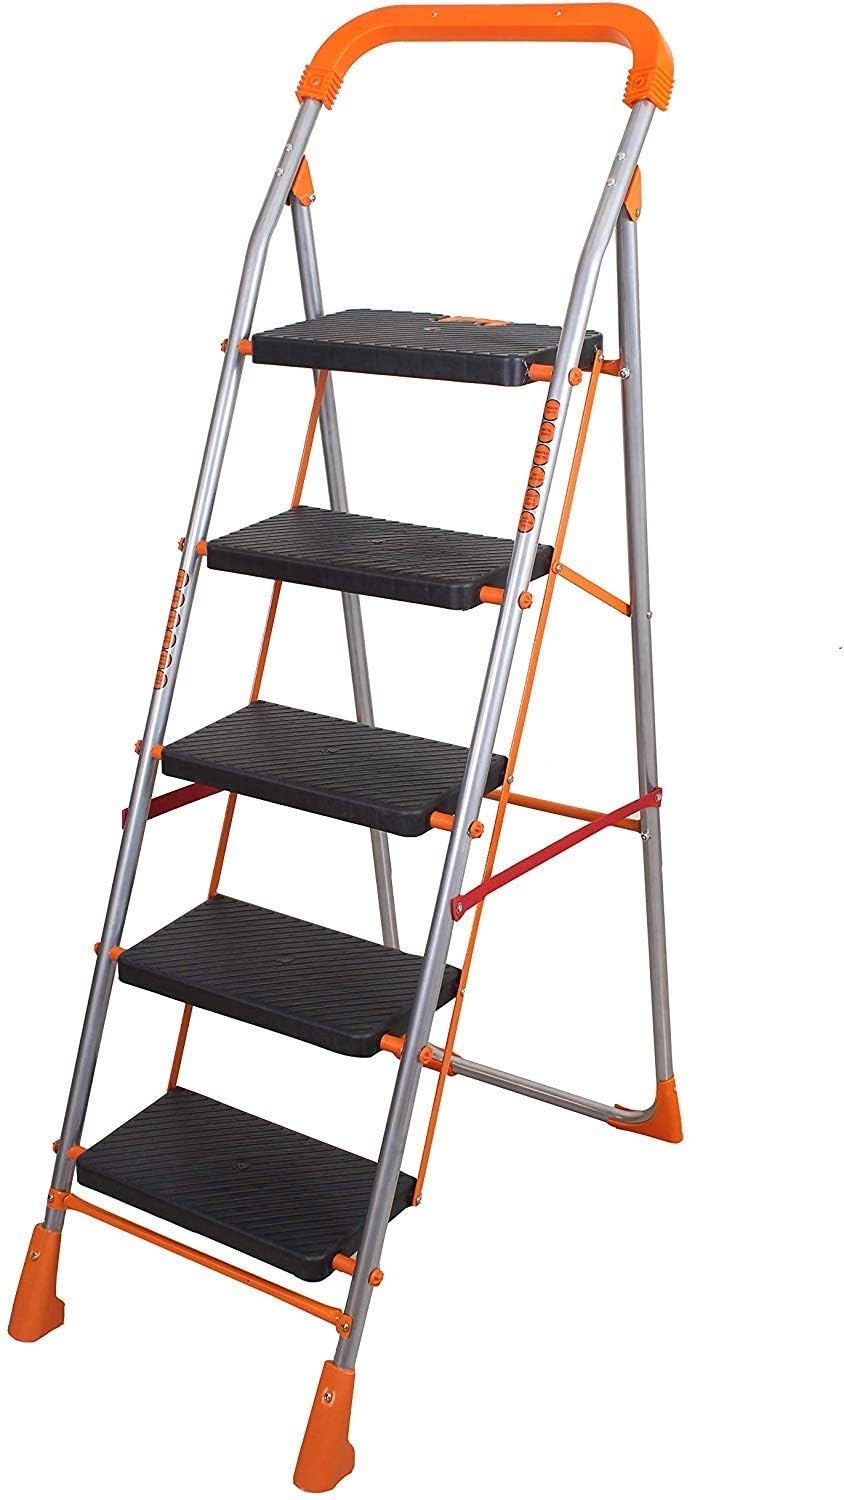 Parasnath Orange Diamond Folding Ladder with Wide Steps 5 Steps 5.1 FT Ladder - Made in India - PARASNATH